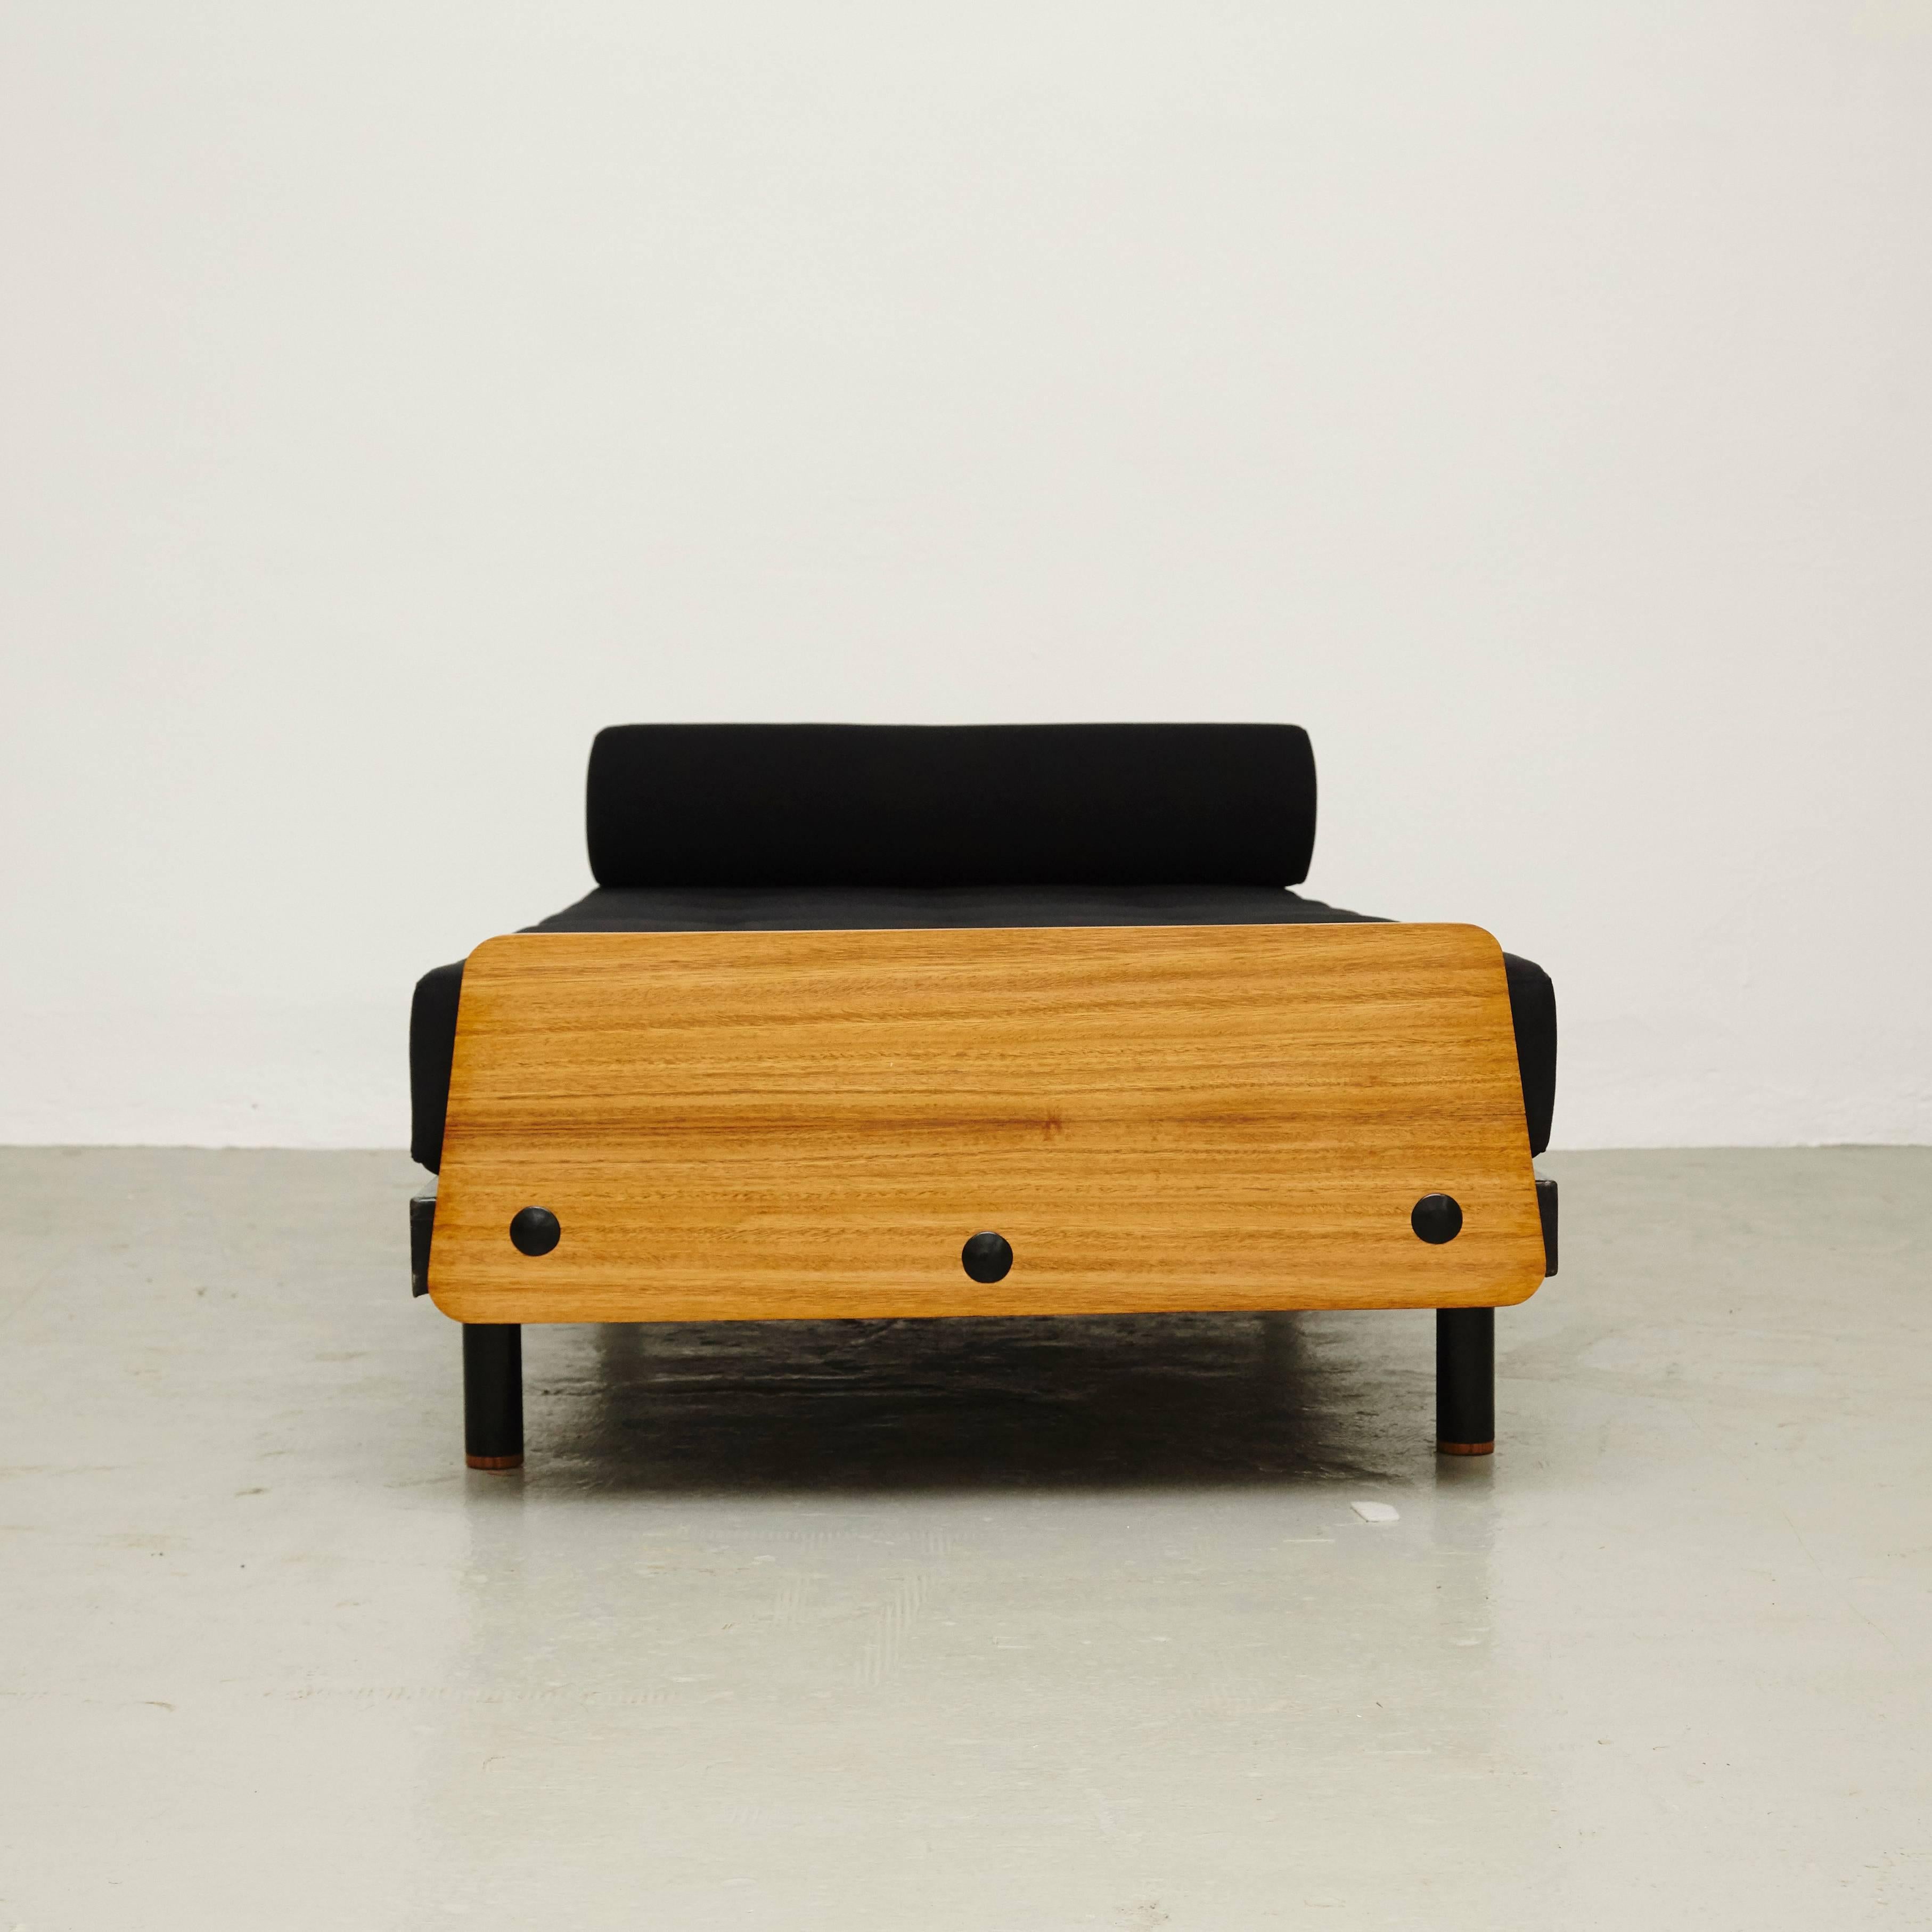 Mid-Century Modern Jean Prouvé S.C.A.L. Daybed, circa 1950